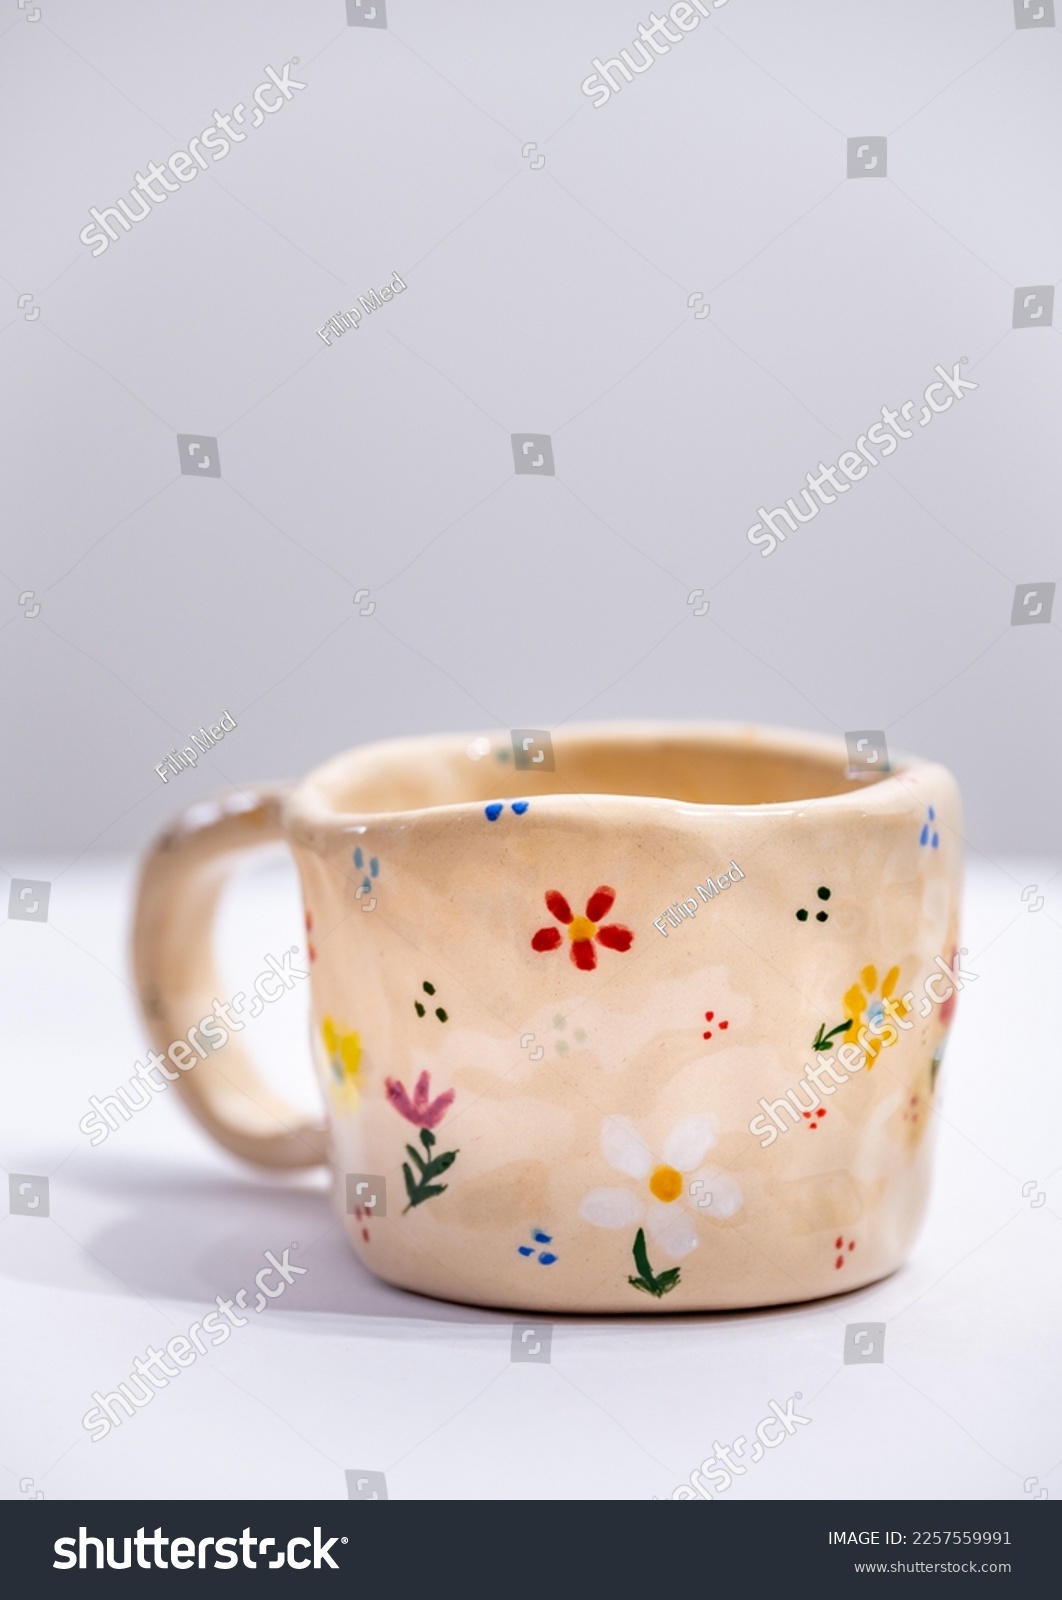 Hand-made ceramic mug with colorful flowers on white background #2257559991